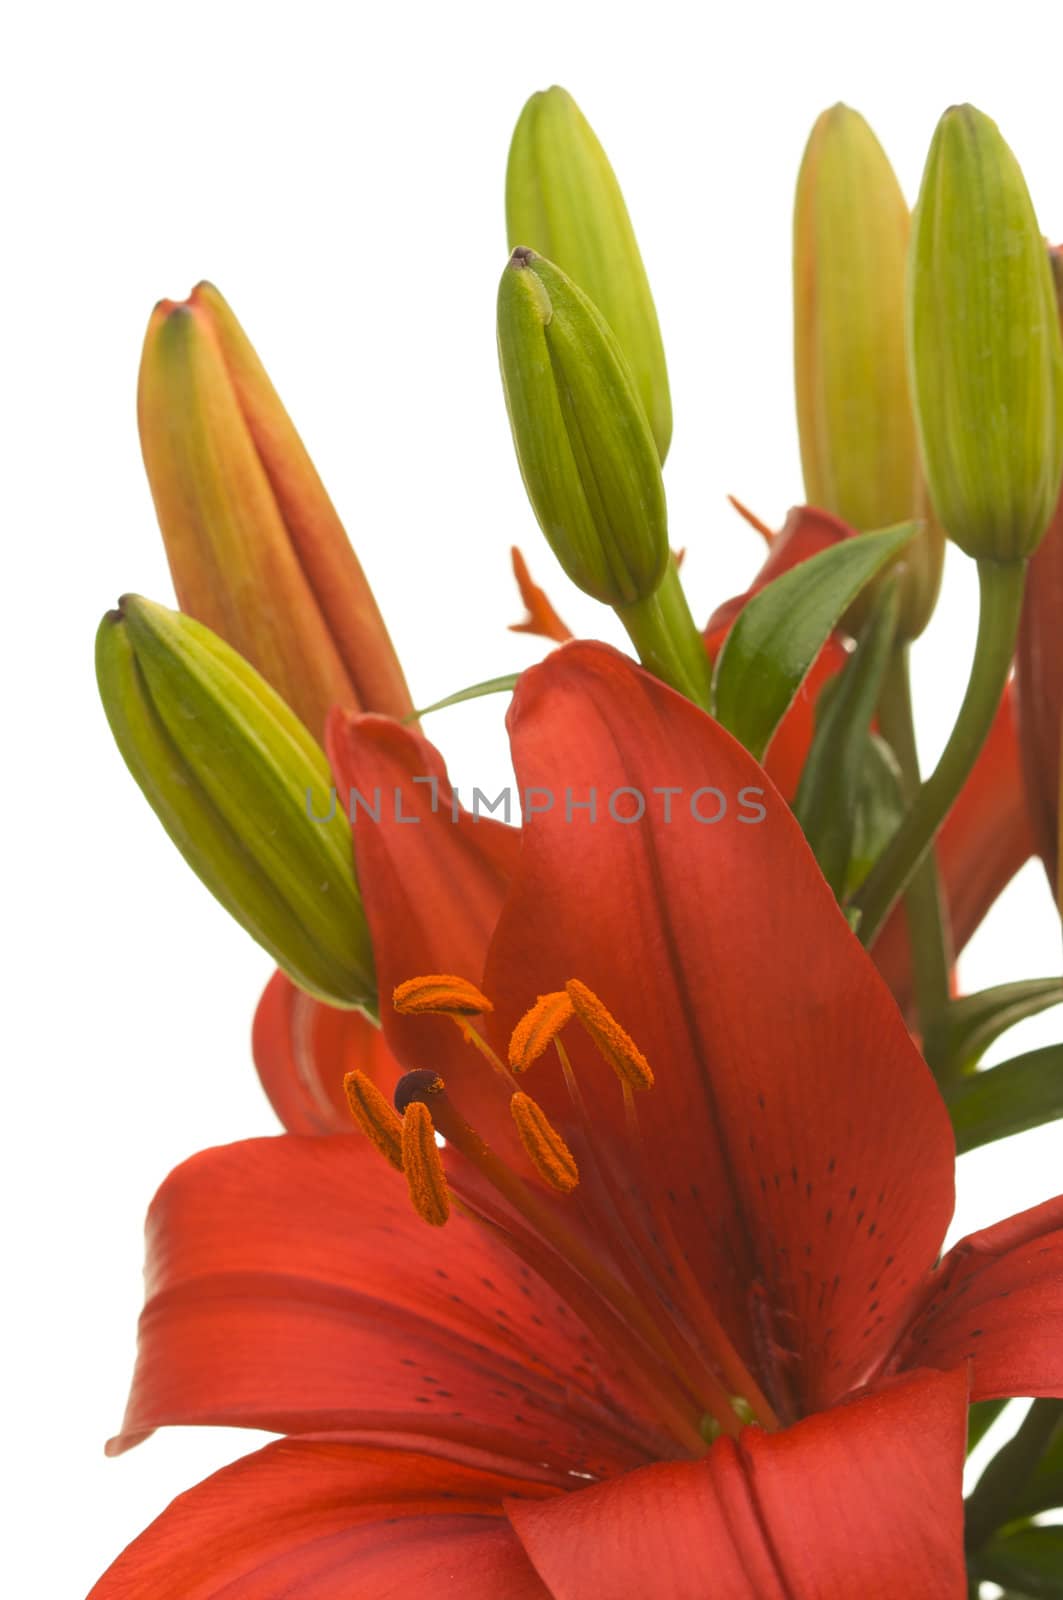 Beautiful Asiatic Lily Bloom on a White Background.